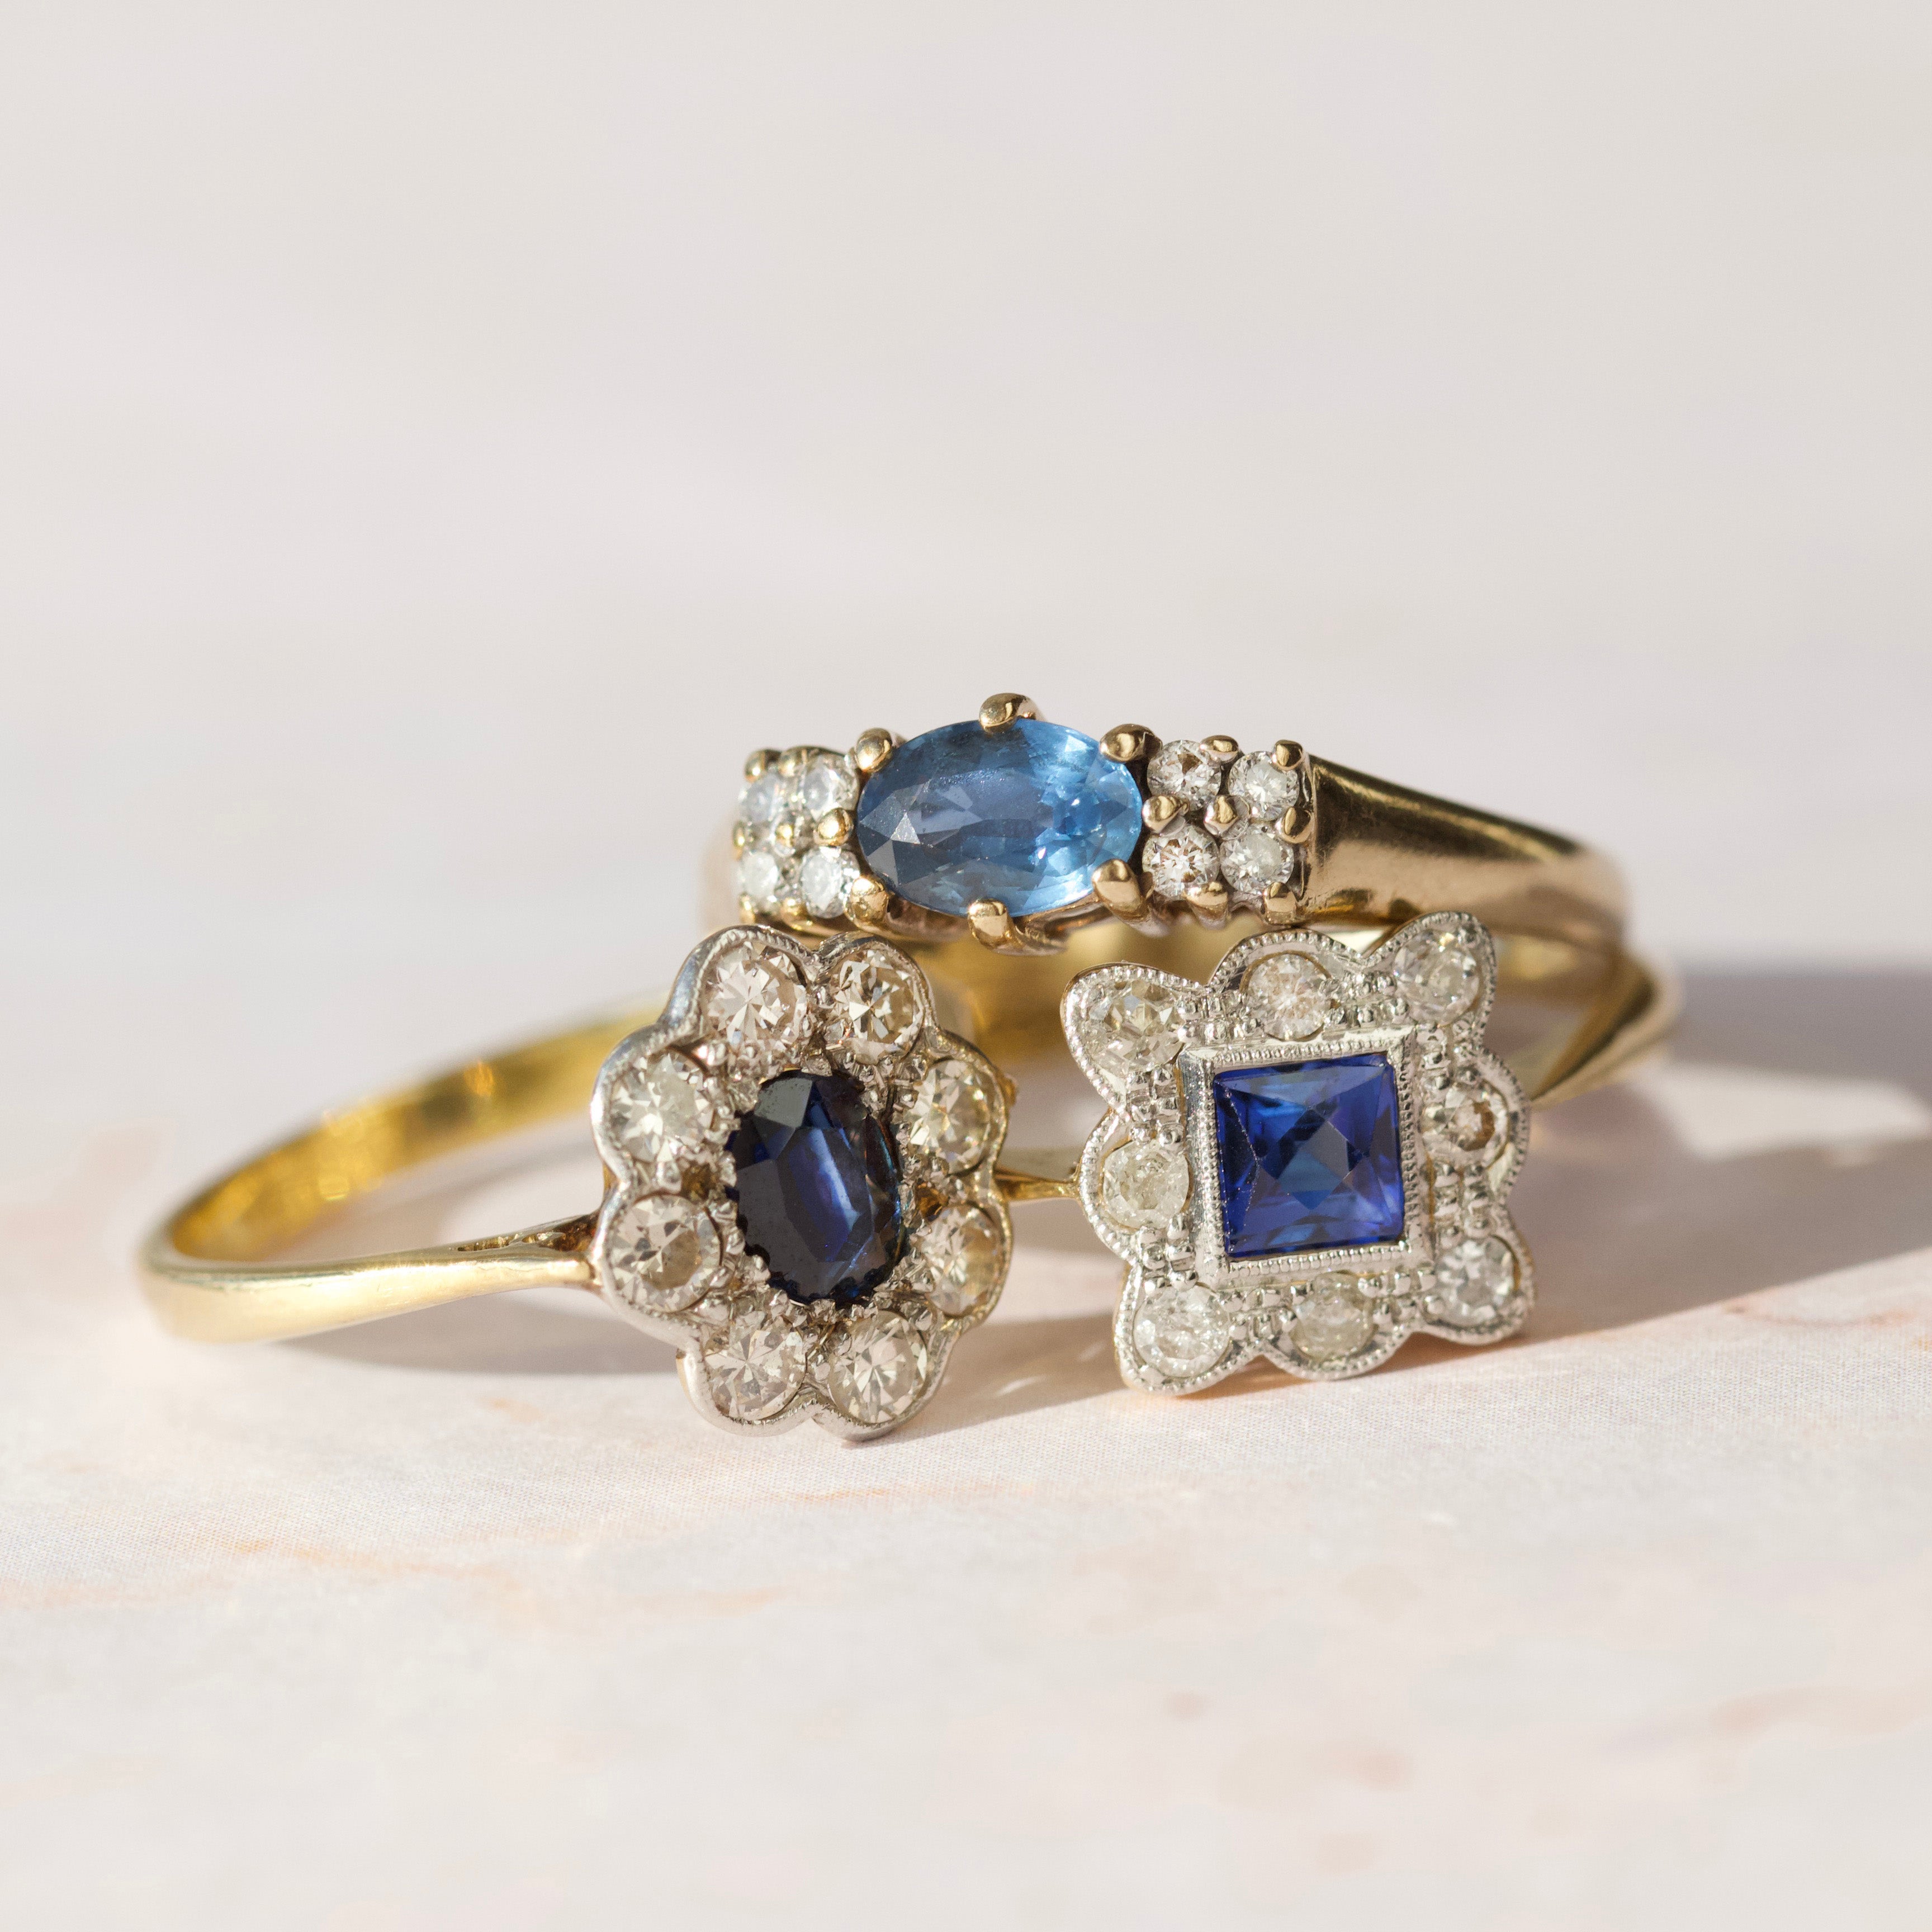 Vintage 9k Solid Yellow Gold Sapphire and Diamond Ring - Size N